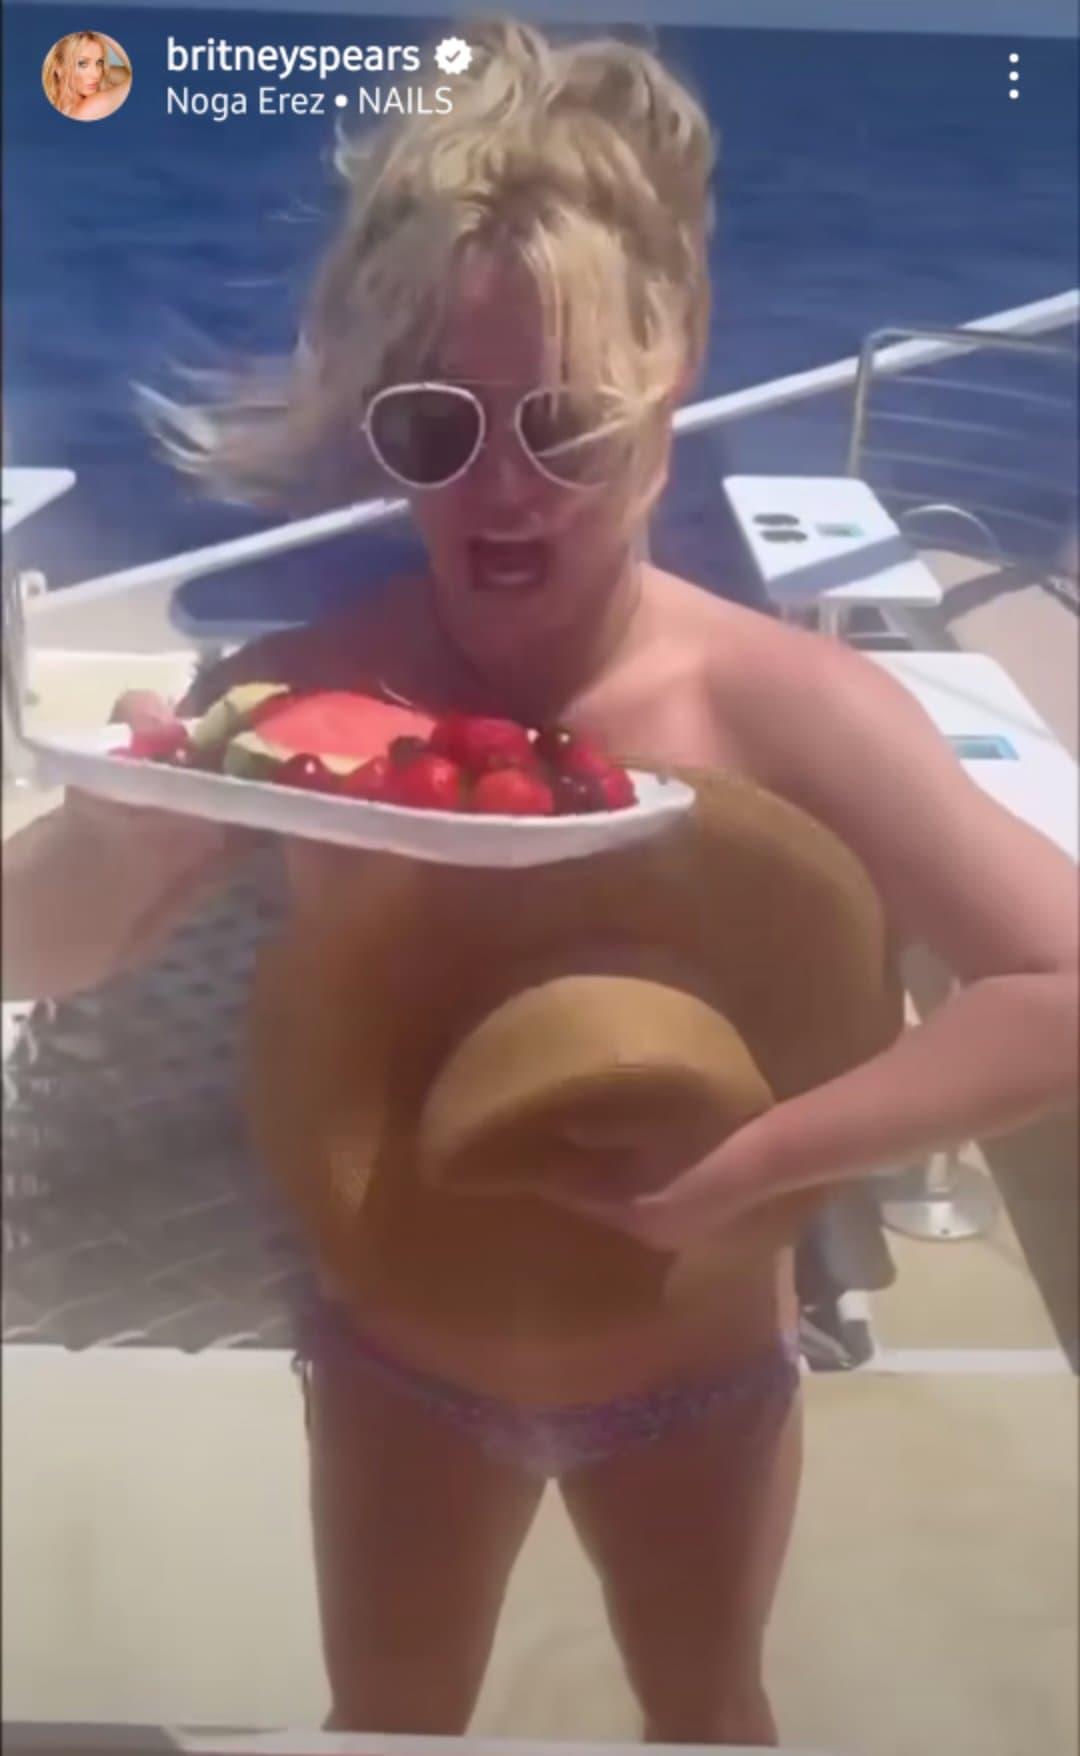 Britney Spears goes sailing on July 30, 2022